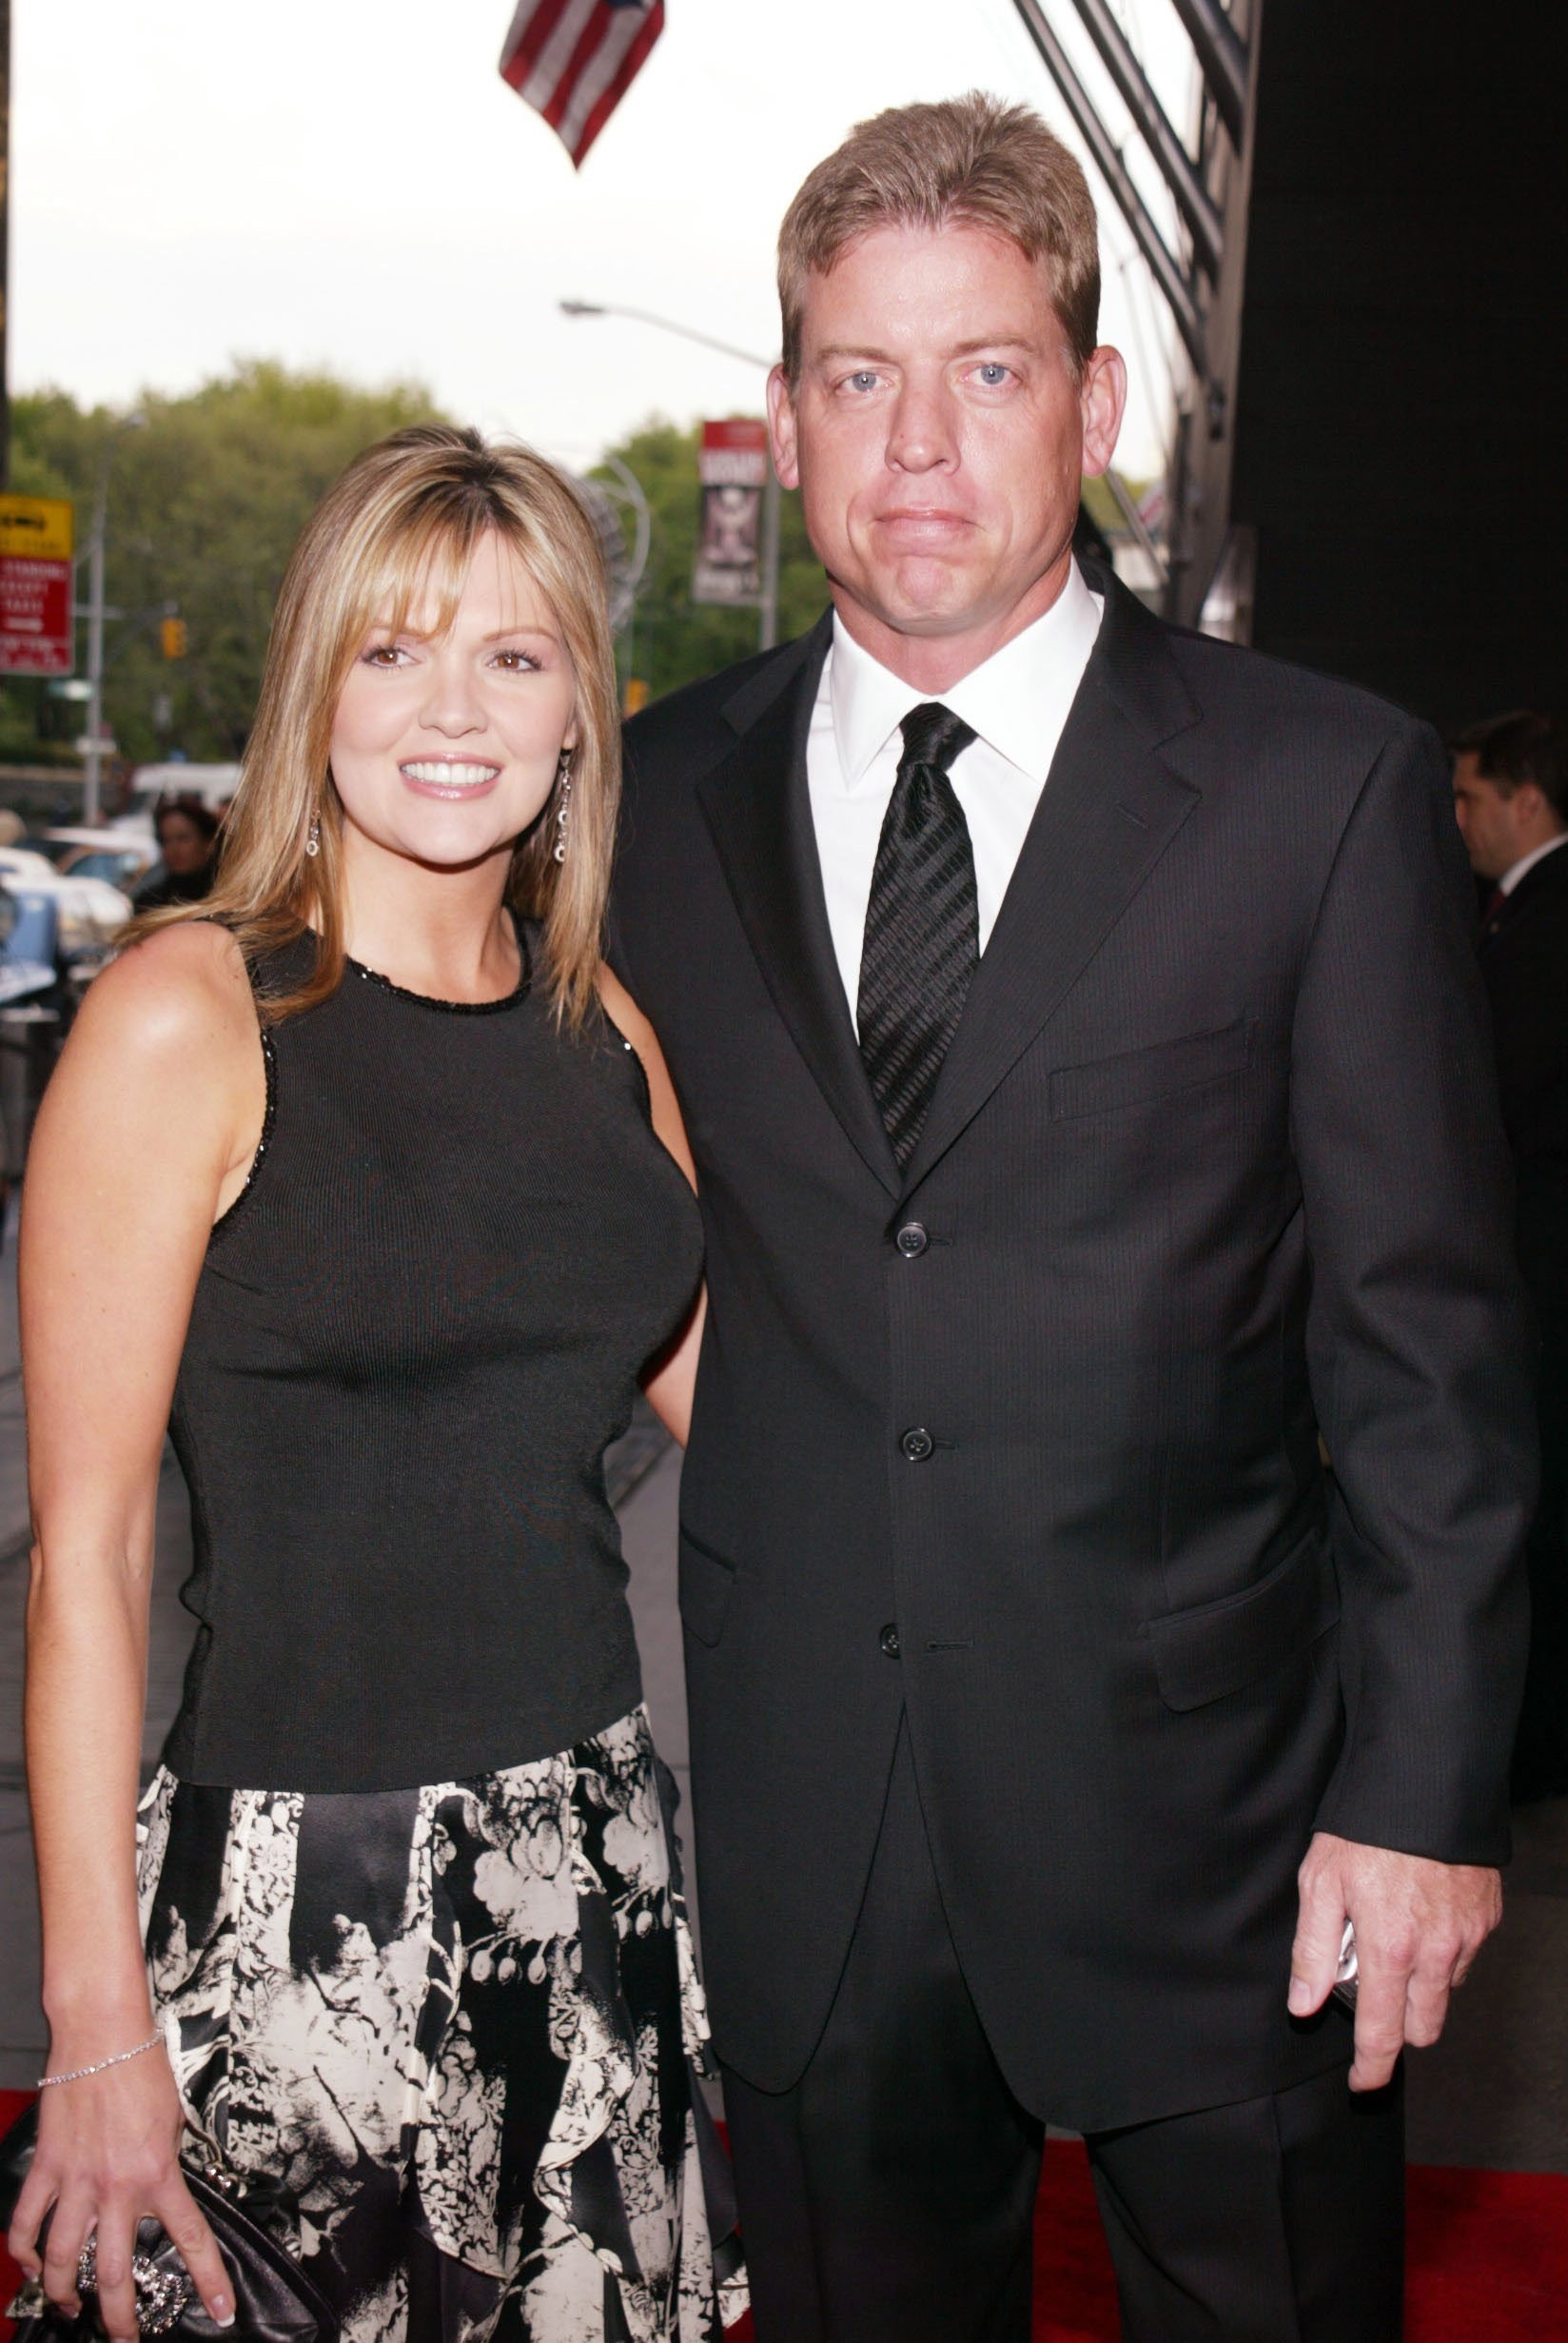 Troy Aikman and Rhonda Worthey at the Benefit Gala for the SU Si Newhouse School in New York. | Source: Getty Images